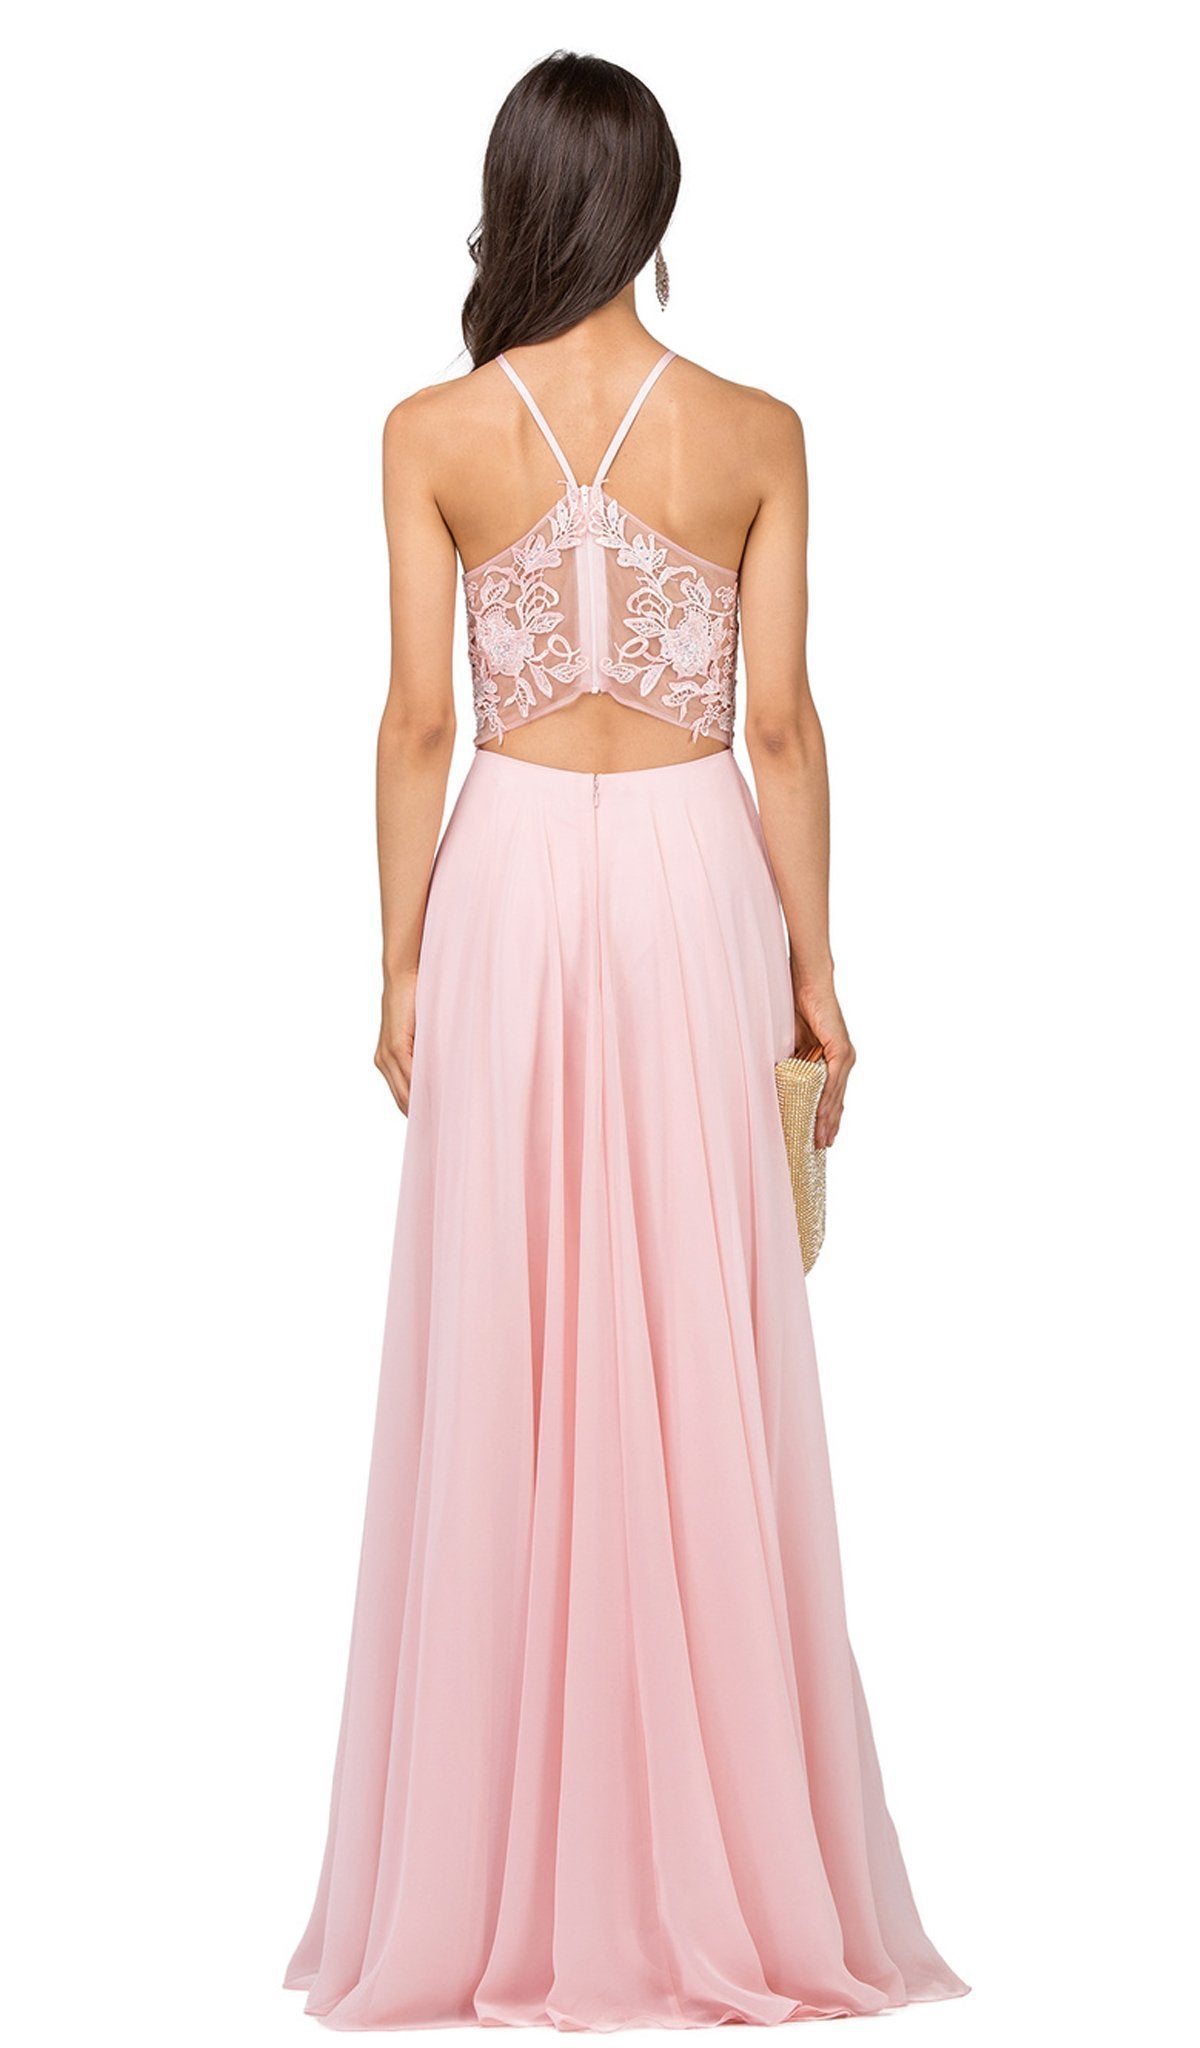 Dancing Queen - 2369 Embroidered Sheer Halter Chiffon Prom Dress Special Occasion Dress